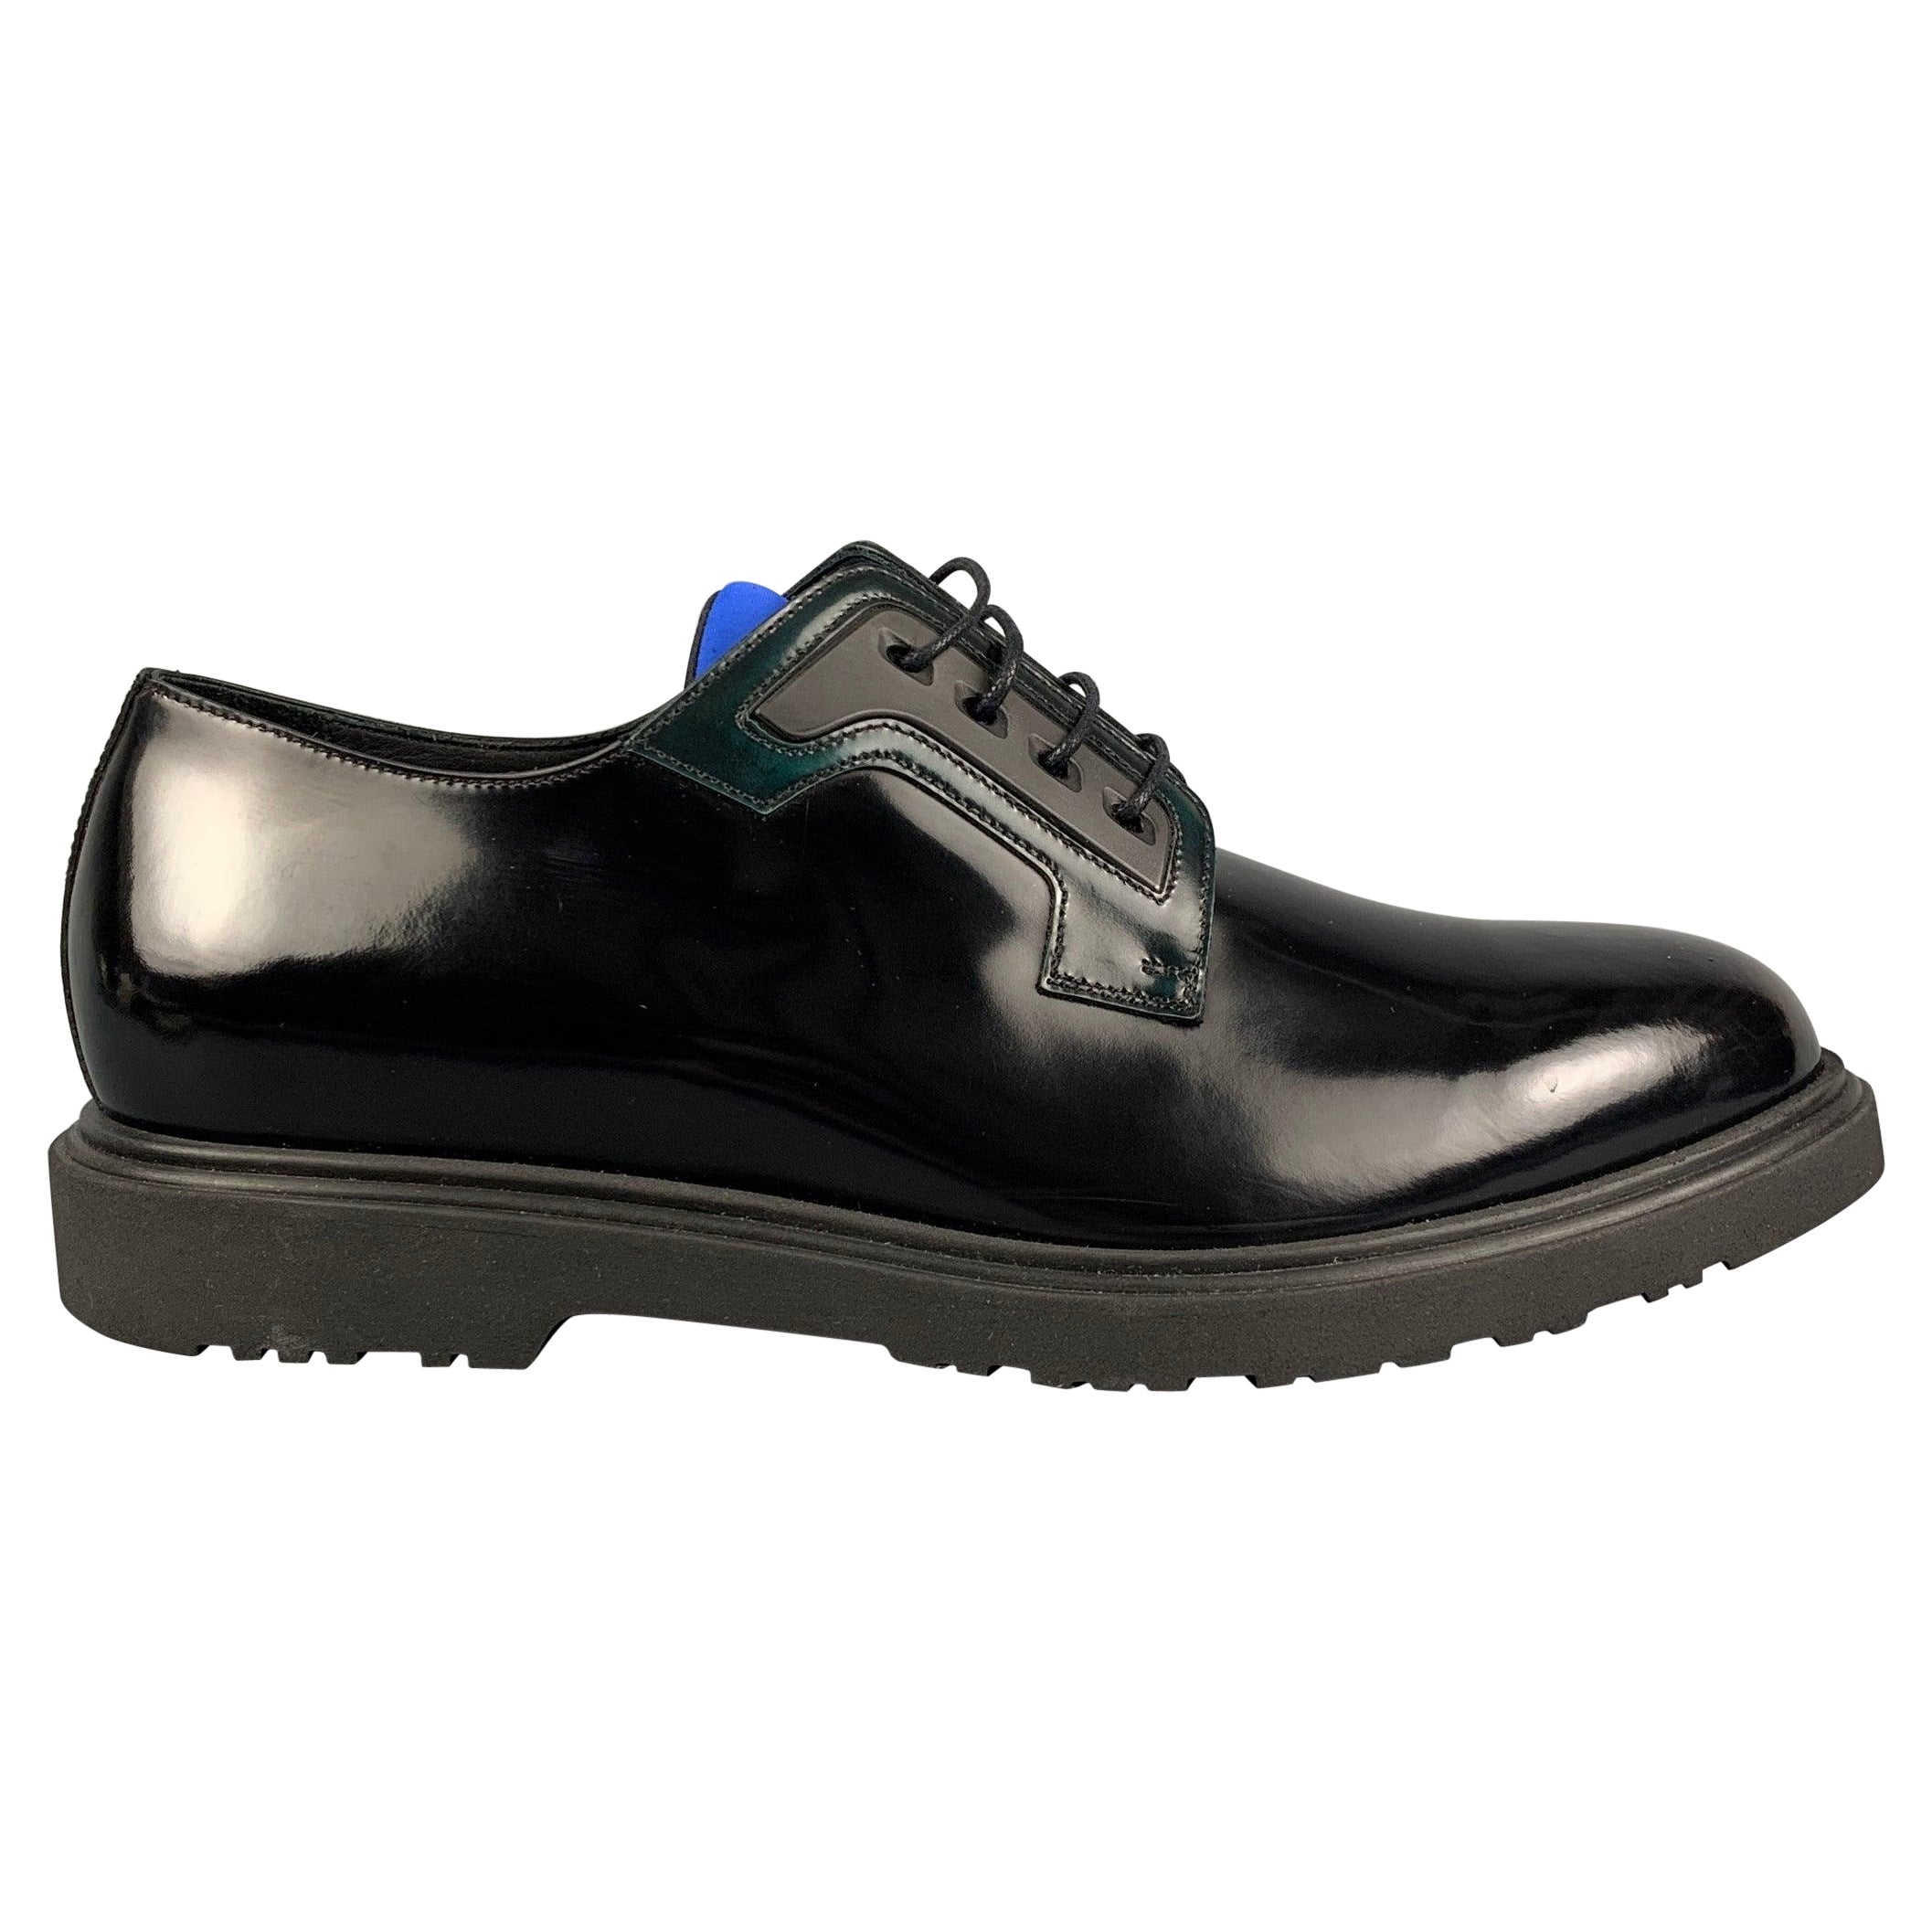 PAUL SMITH Size 10 Black Leather Lace Up Shoes For Sale